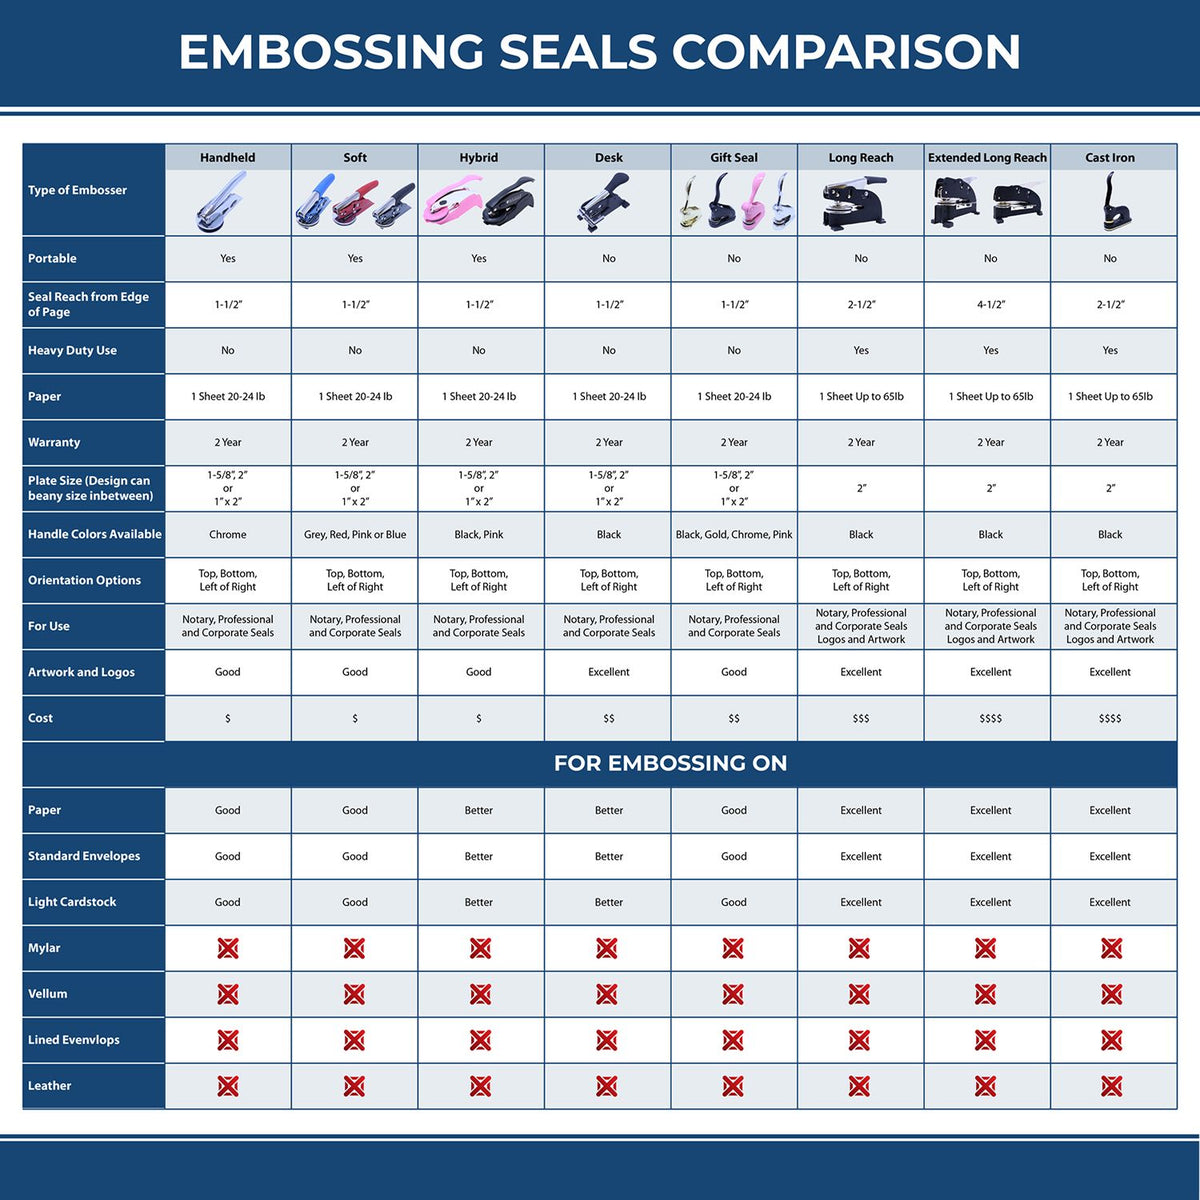 A comparison chart for the different types of mount models available for the State of Delaware Extended Long Reach Geologist Seal